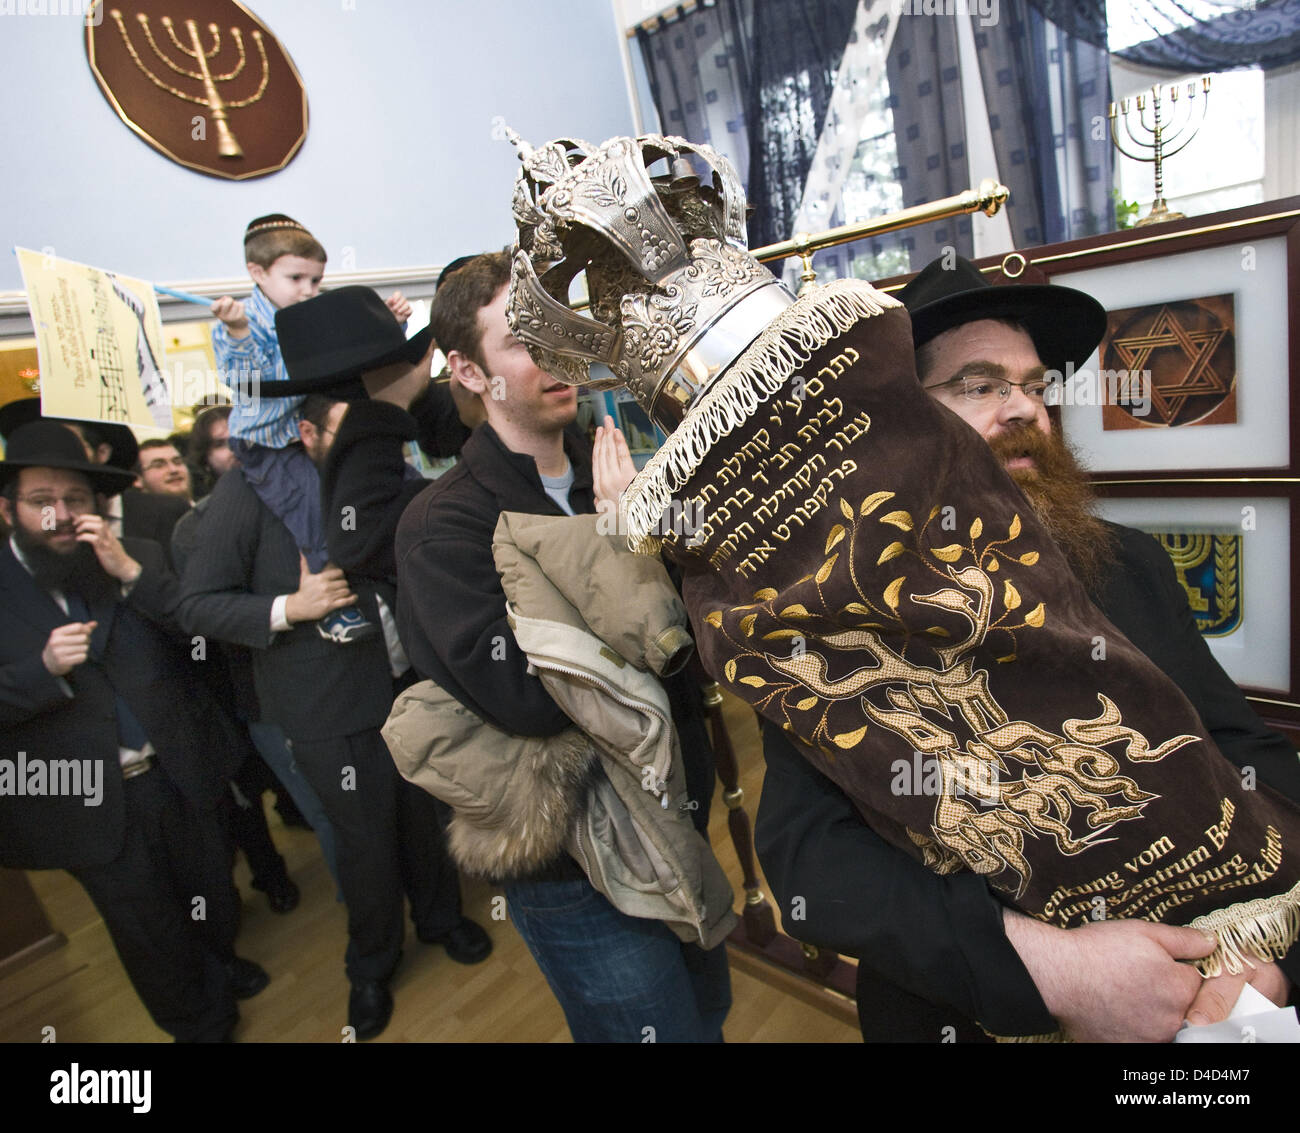 The jewish community of Frankfurt Oder receives its first Torah scrolls since WWII, in Frankfurt Oder, 16 March 2008. The scrolls are a present of Berlin education centre Chabad Lubawitsch. The comunnitie of about 600 receives the scolls on the occasion of a visit of 30 jewish Americans that took part ceremonial handing over of the scrolls. Photo: PATRICK PLEUL Stock Photo